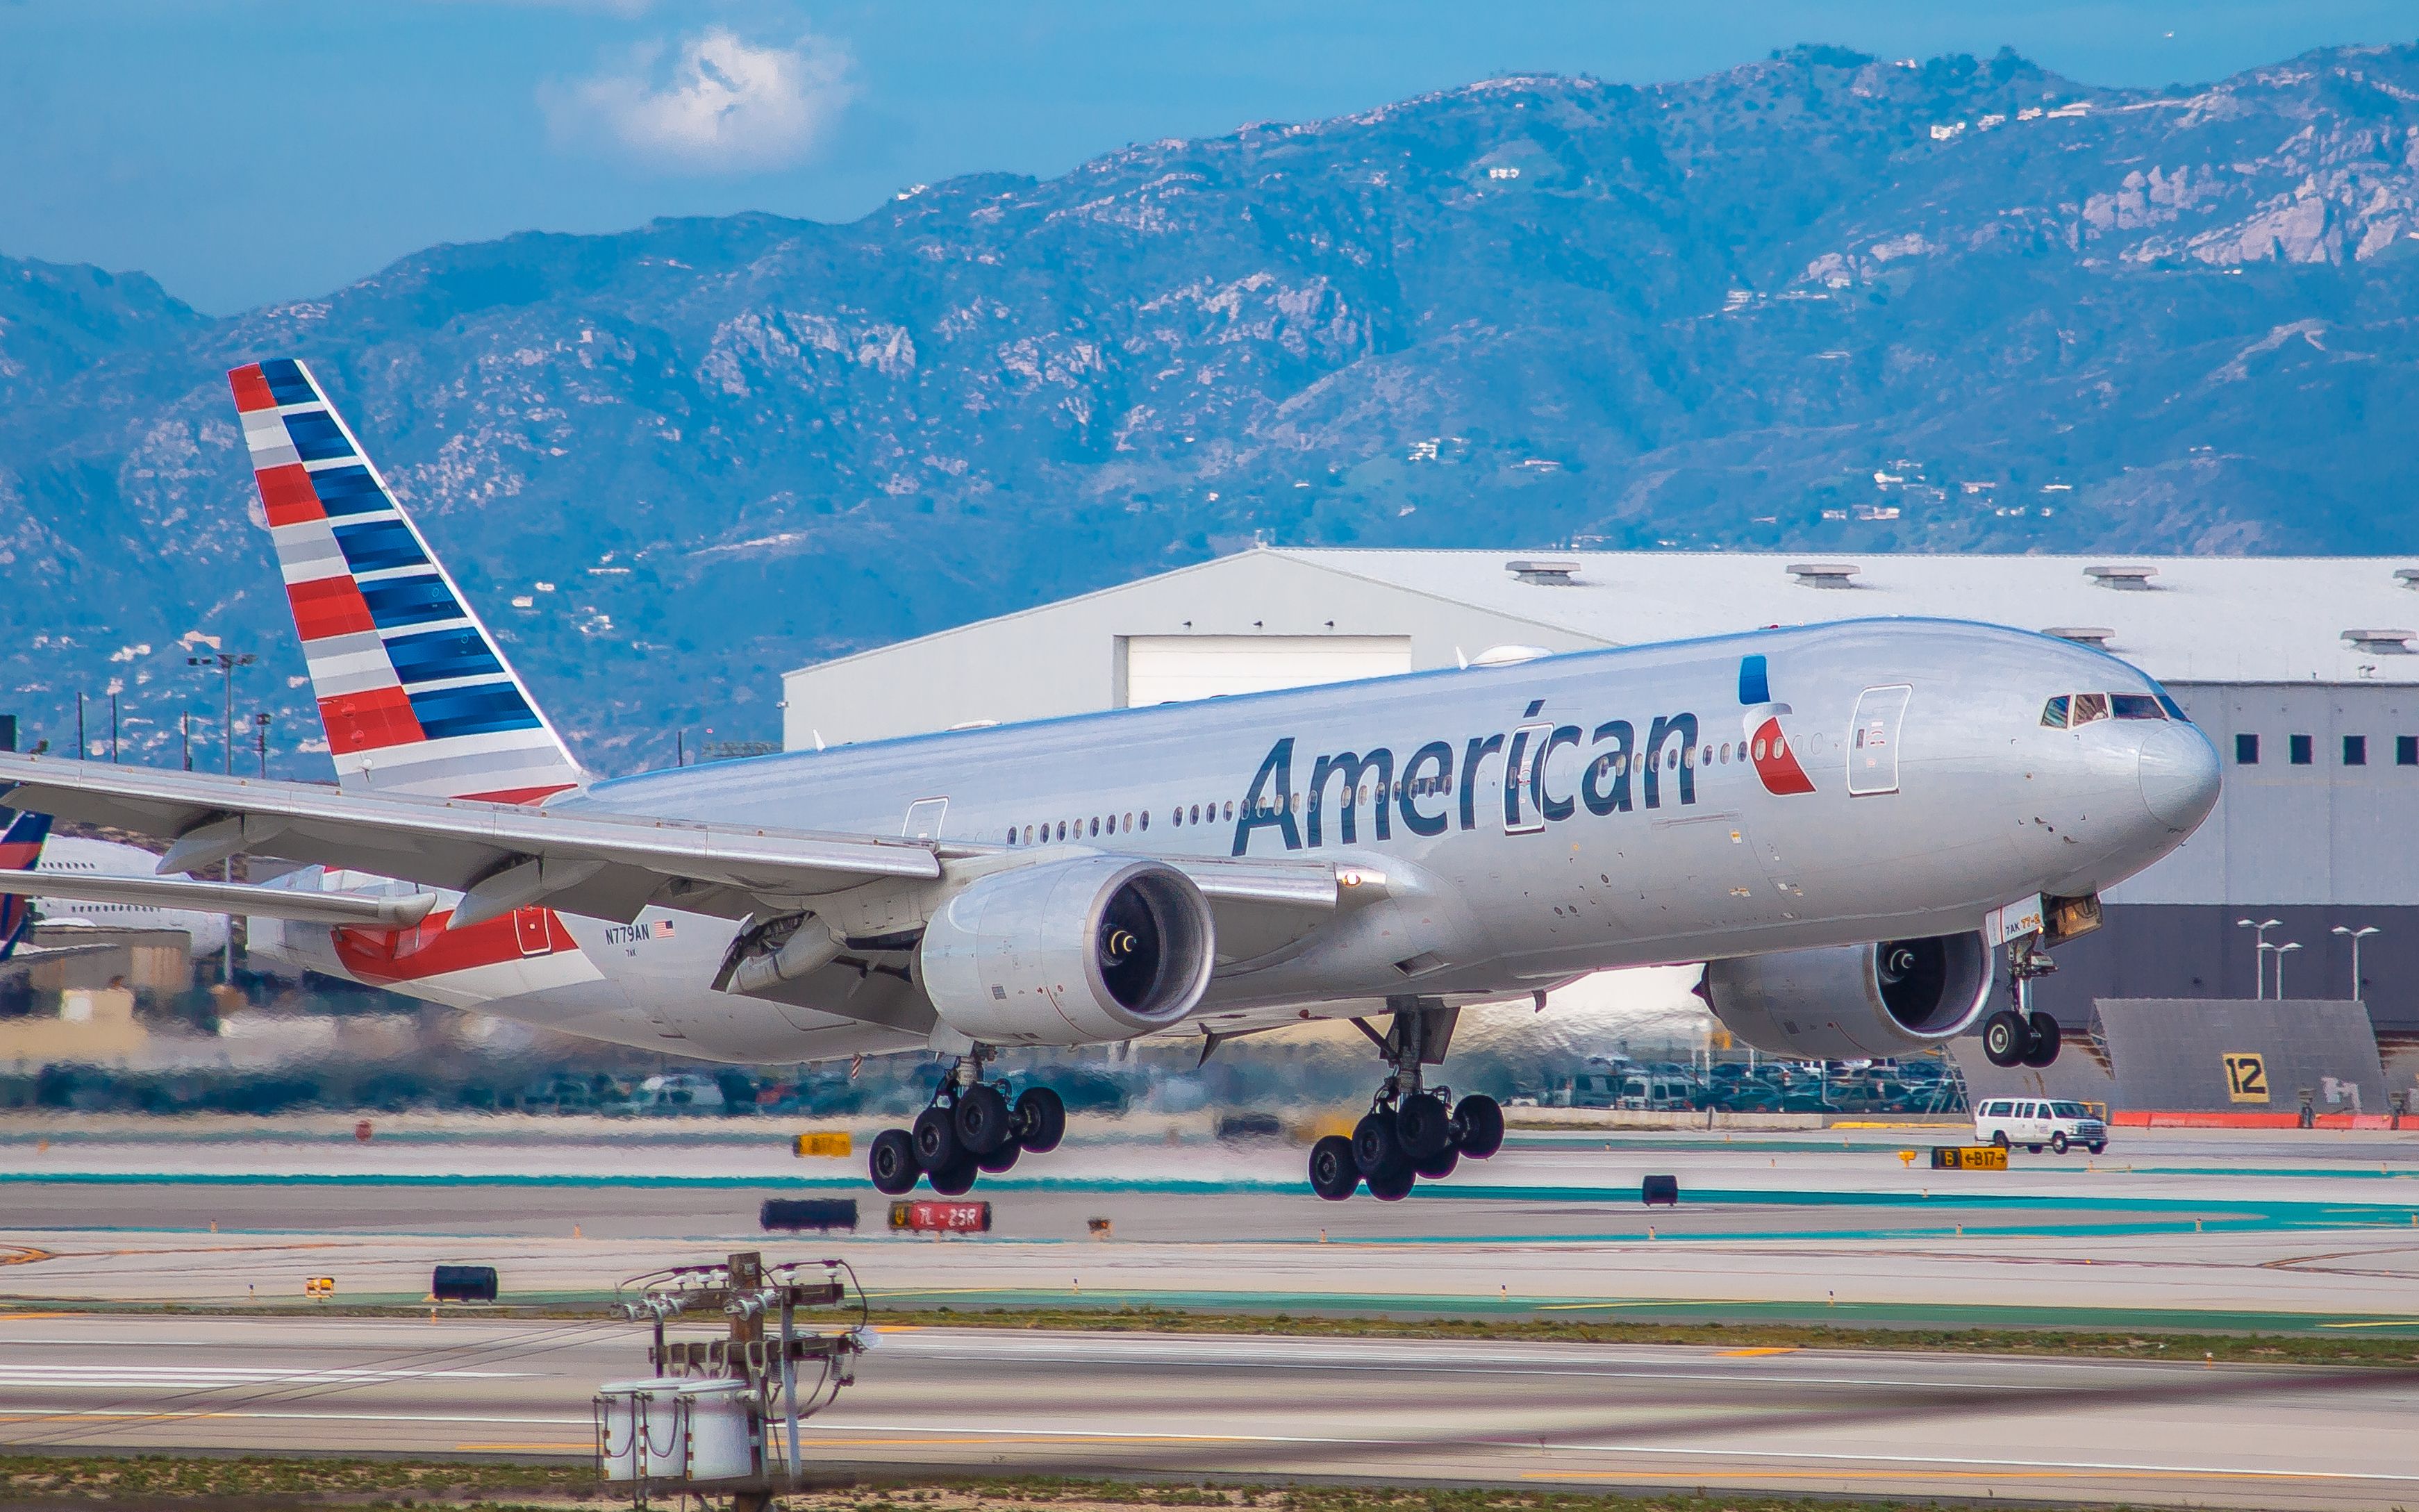 An American Airlines aircraft 